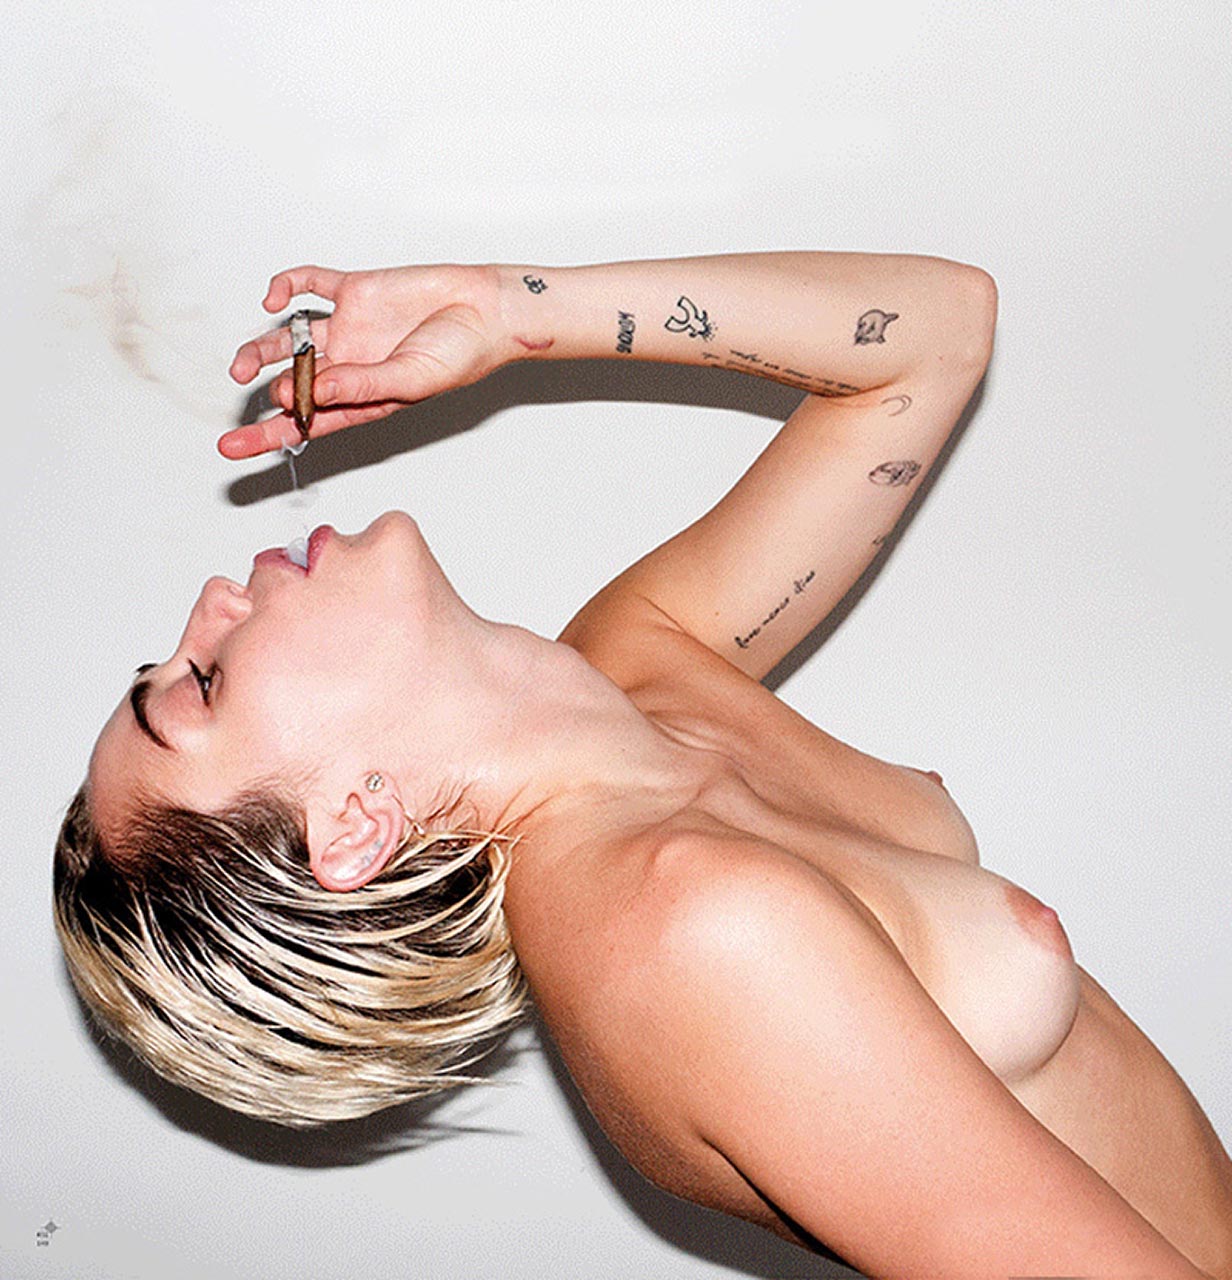 Miley Cyrus nude photoshoot for the Candy magazine! 